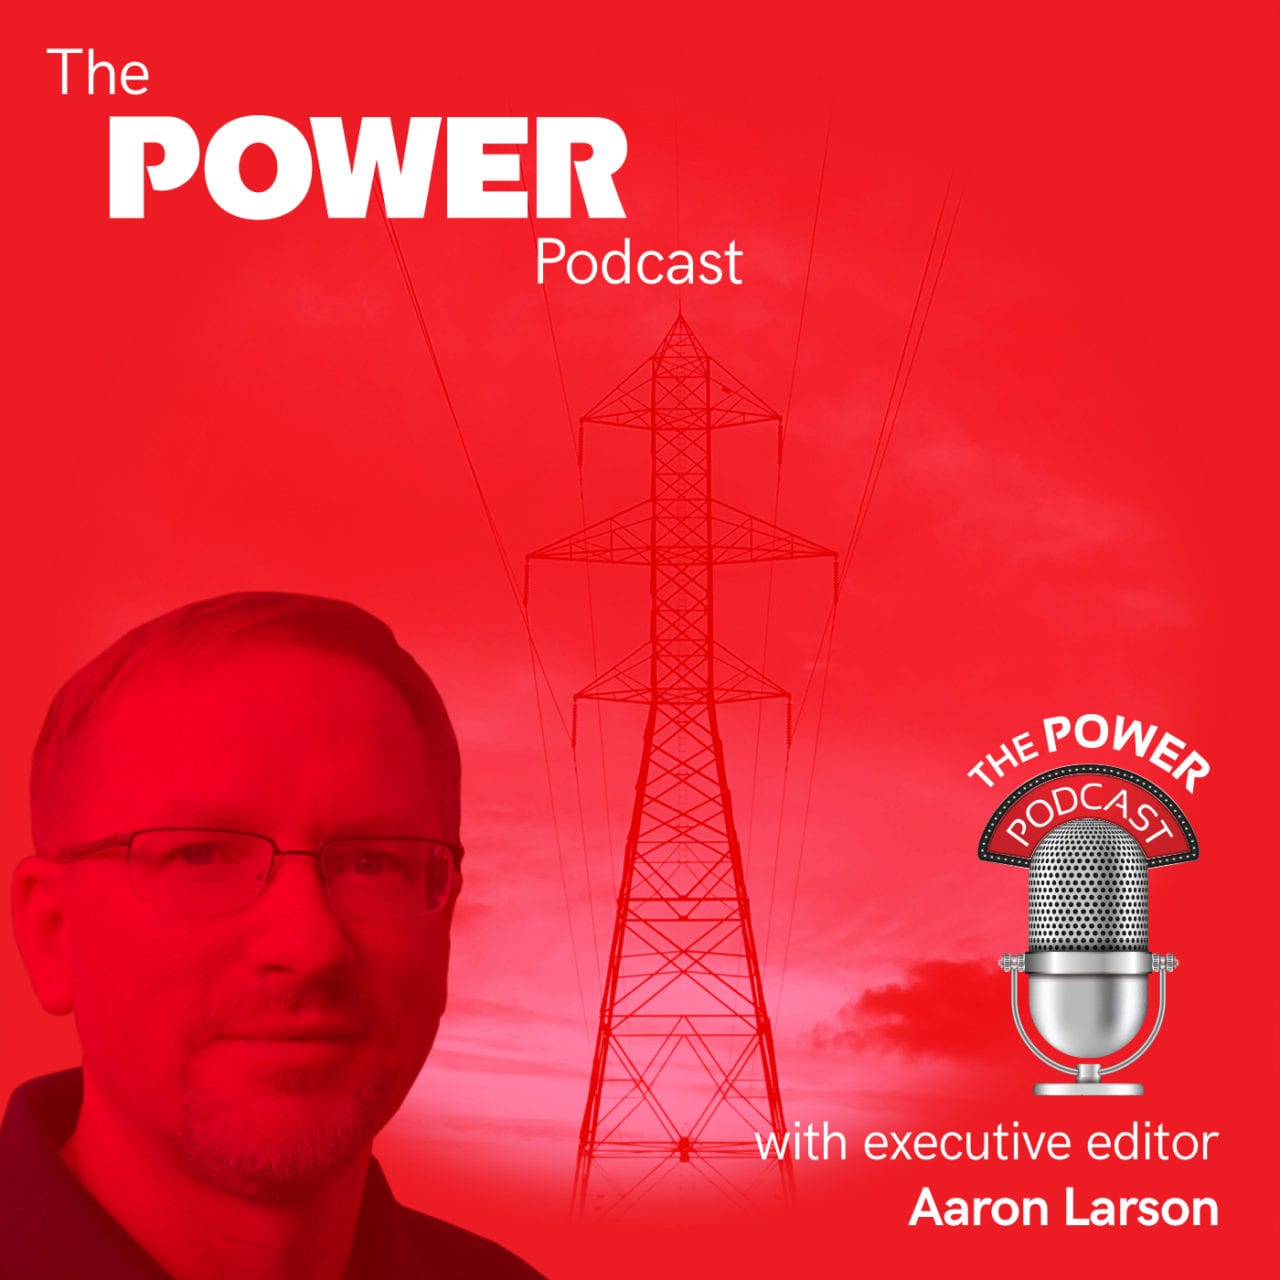 Power Company Business Models Are Evolving [PODCAST]